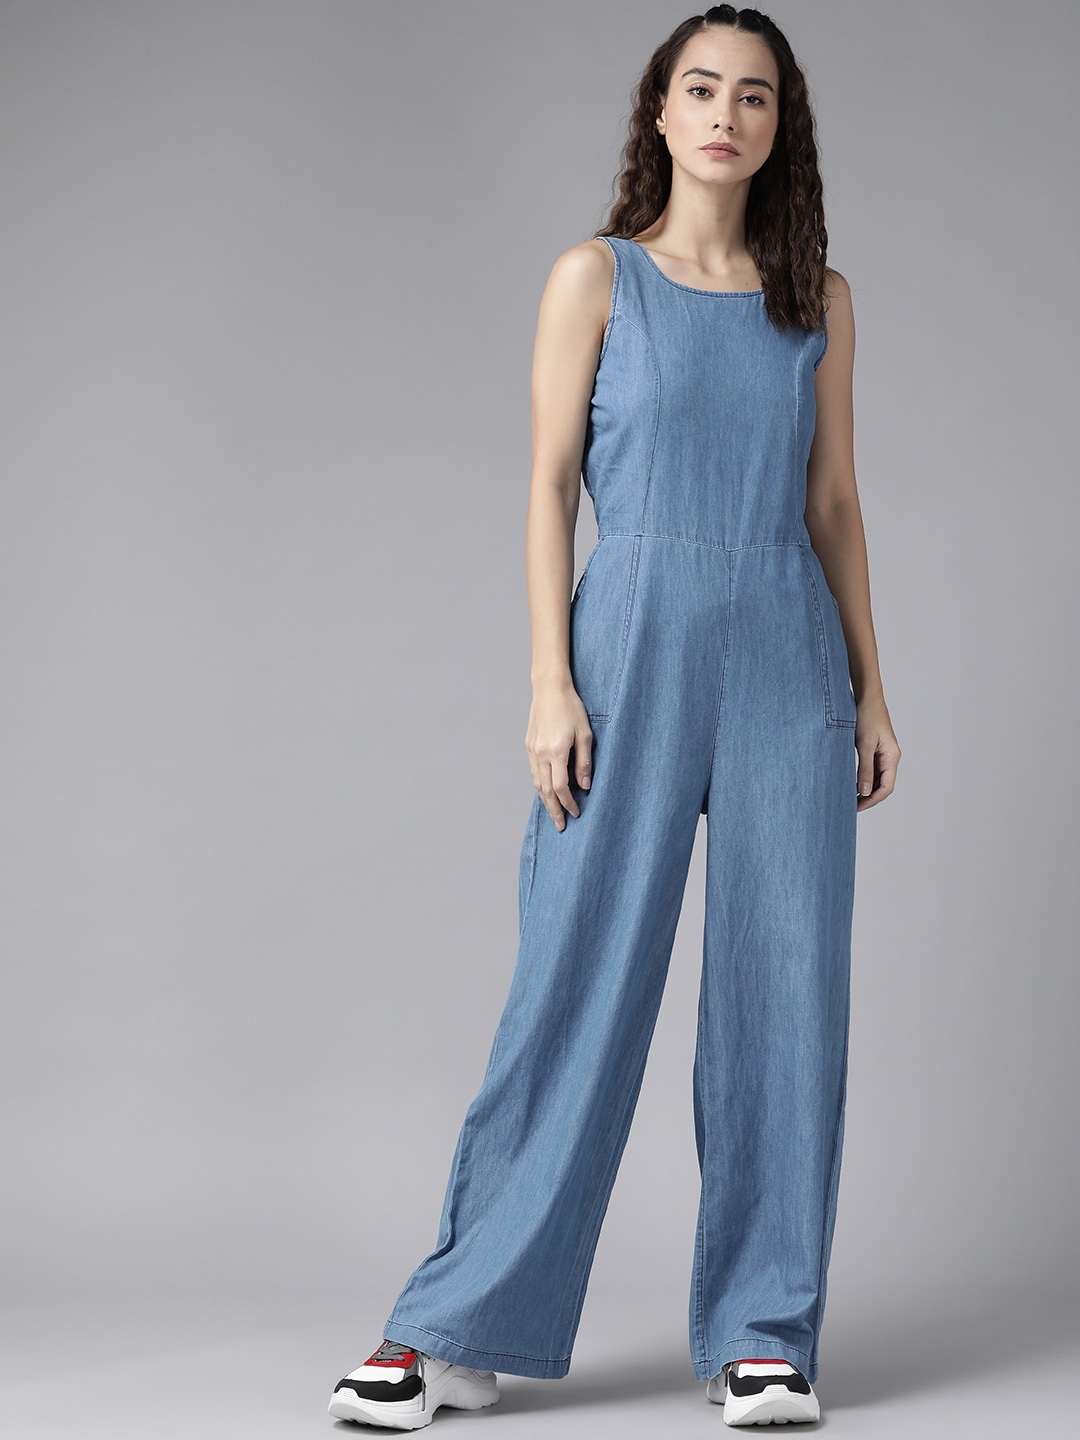 The Roadster Lifestyle Co Blue Solid Overall Cotton Basic Jumpsuit Price in India